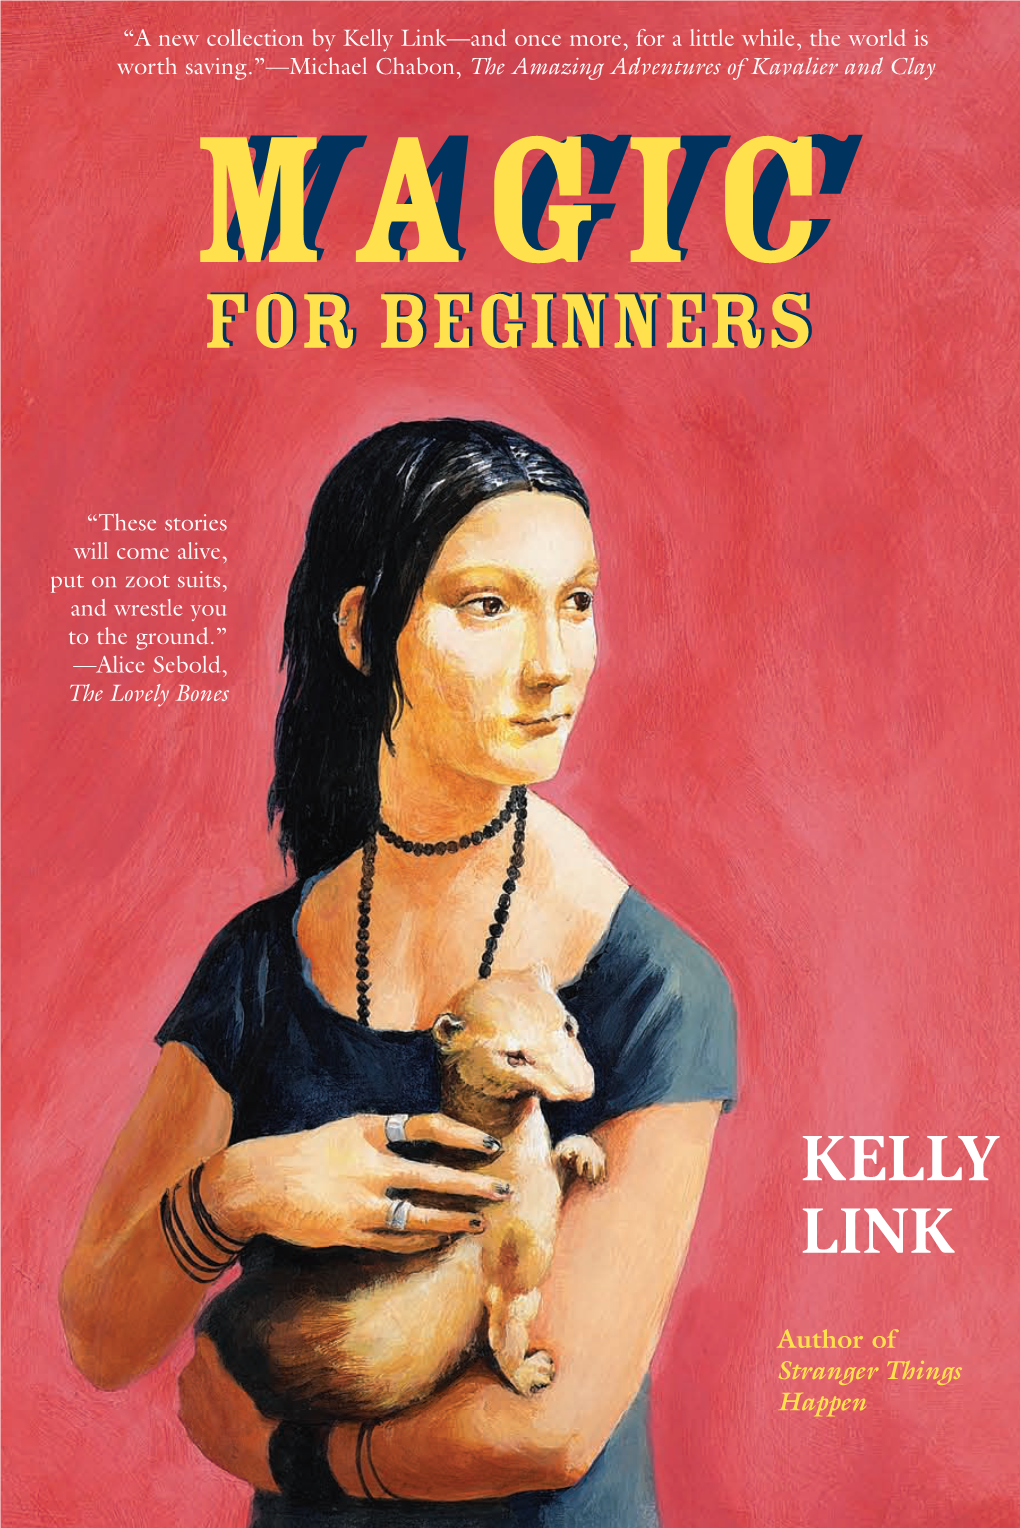 Magic for Beginners Is the Highly Anticipated Second Collection by Kelly Kelly Link Is the Editor of the Anthol- Link (Stranger Things Happen)